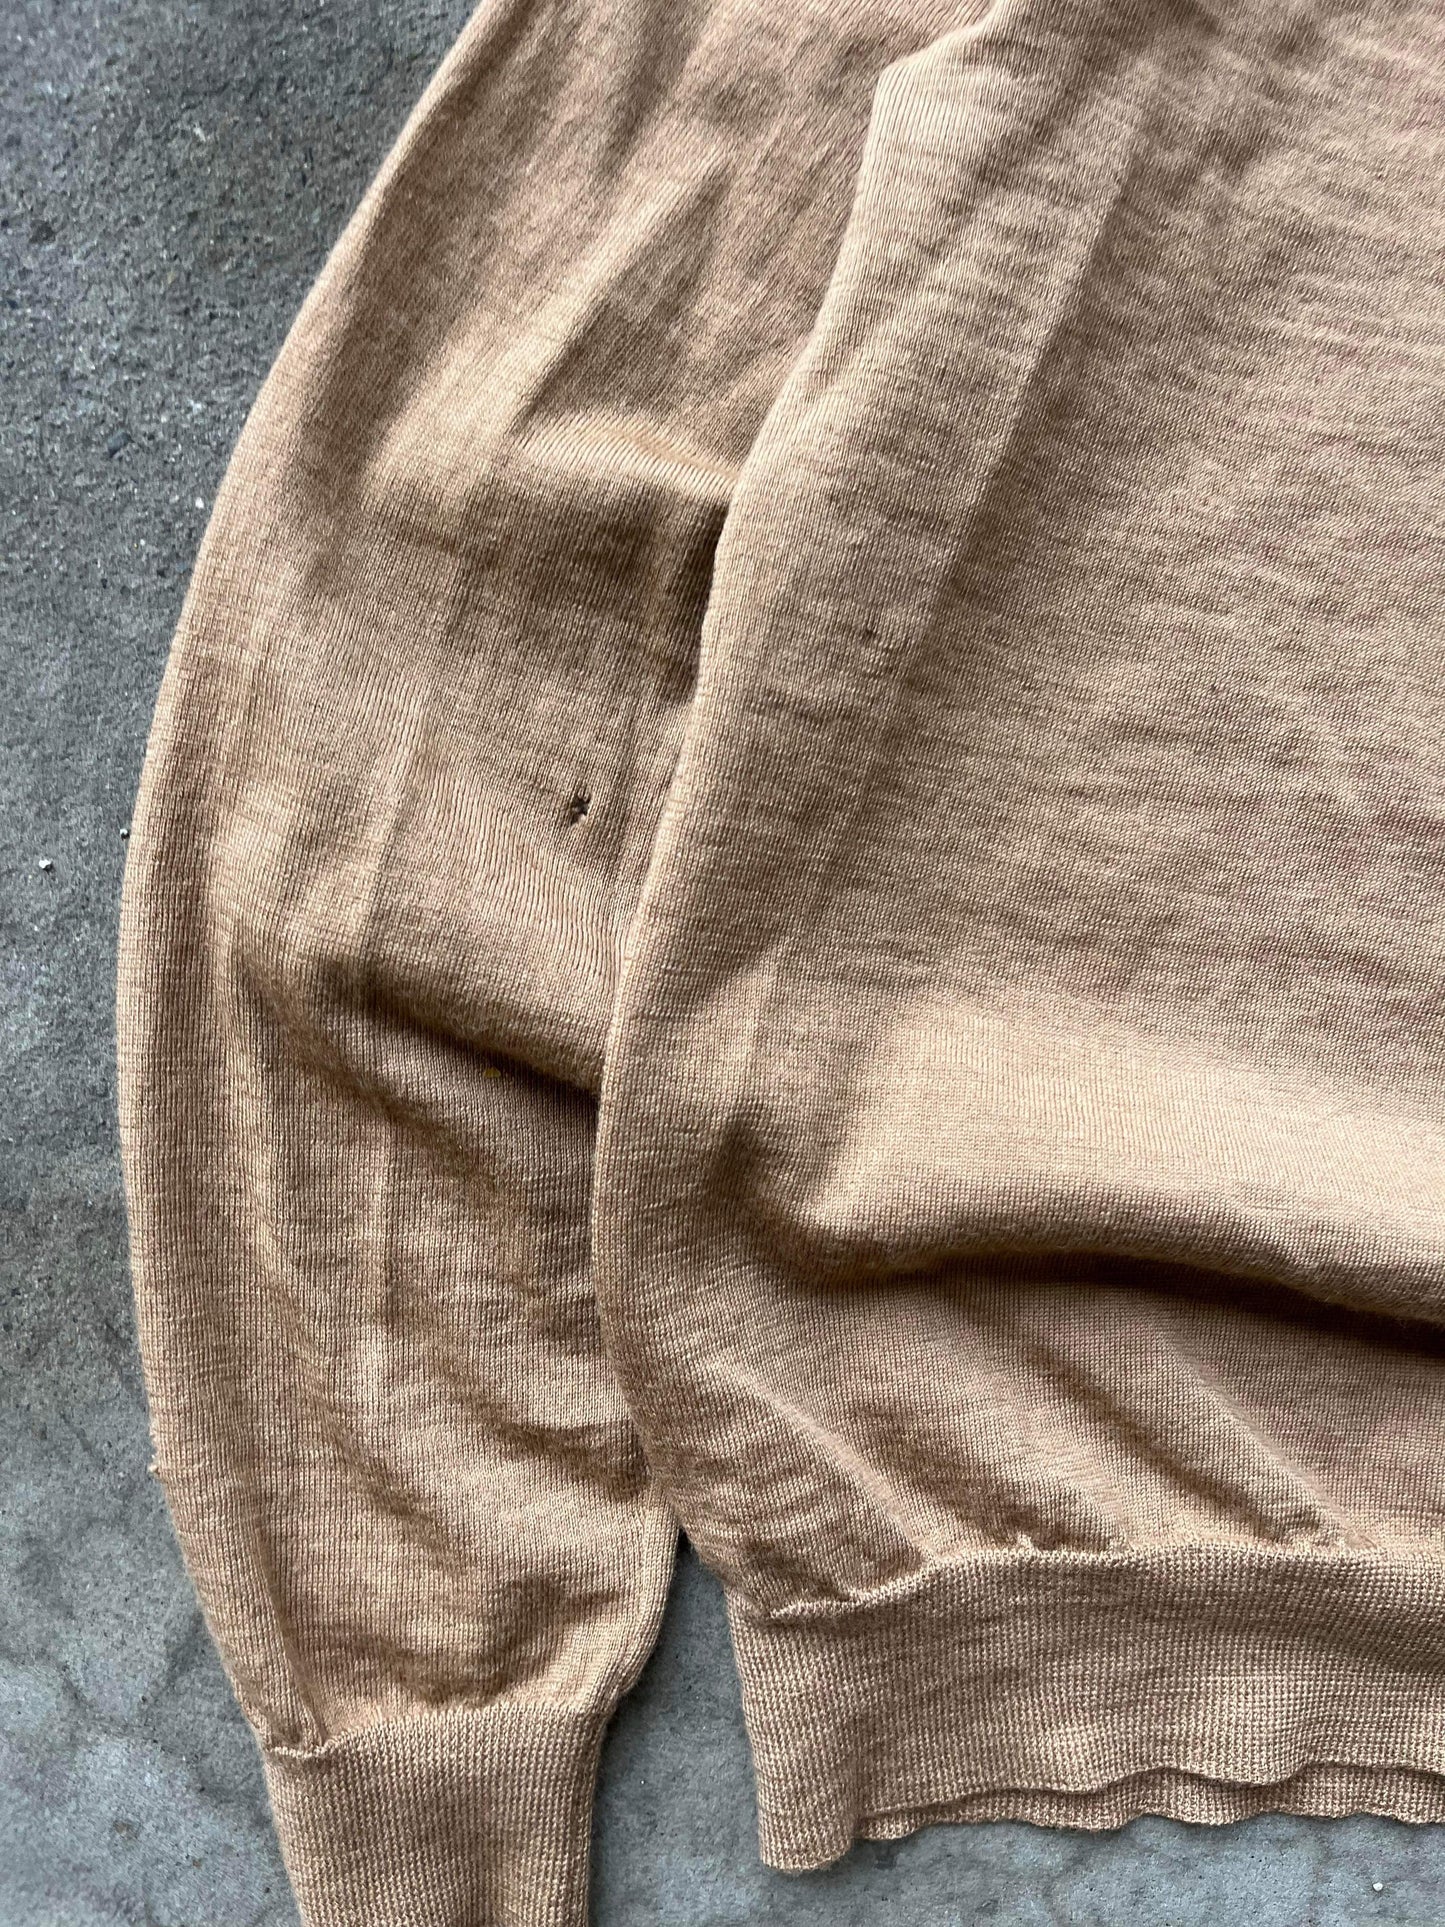 (S) Burberry Merino Wool Cafe Color Knit